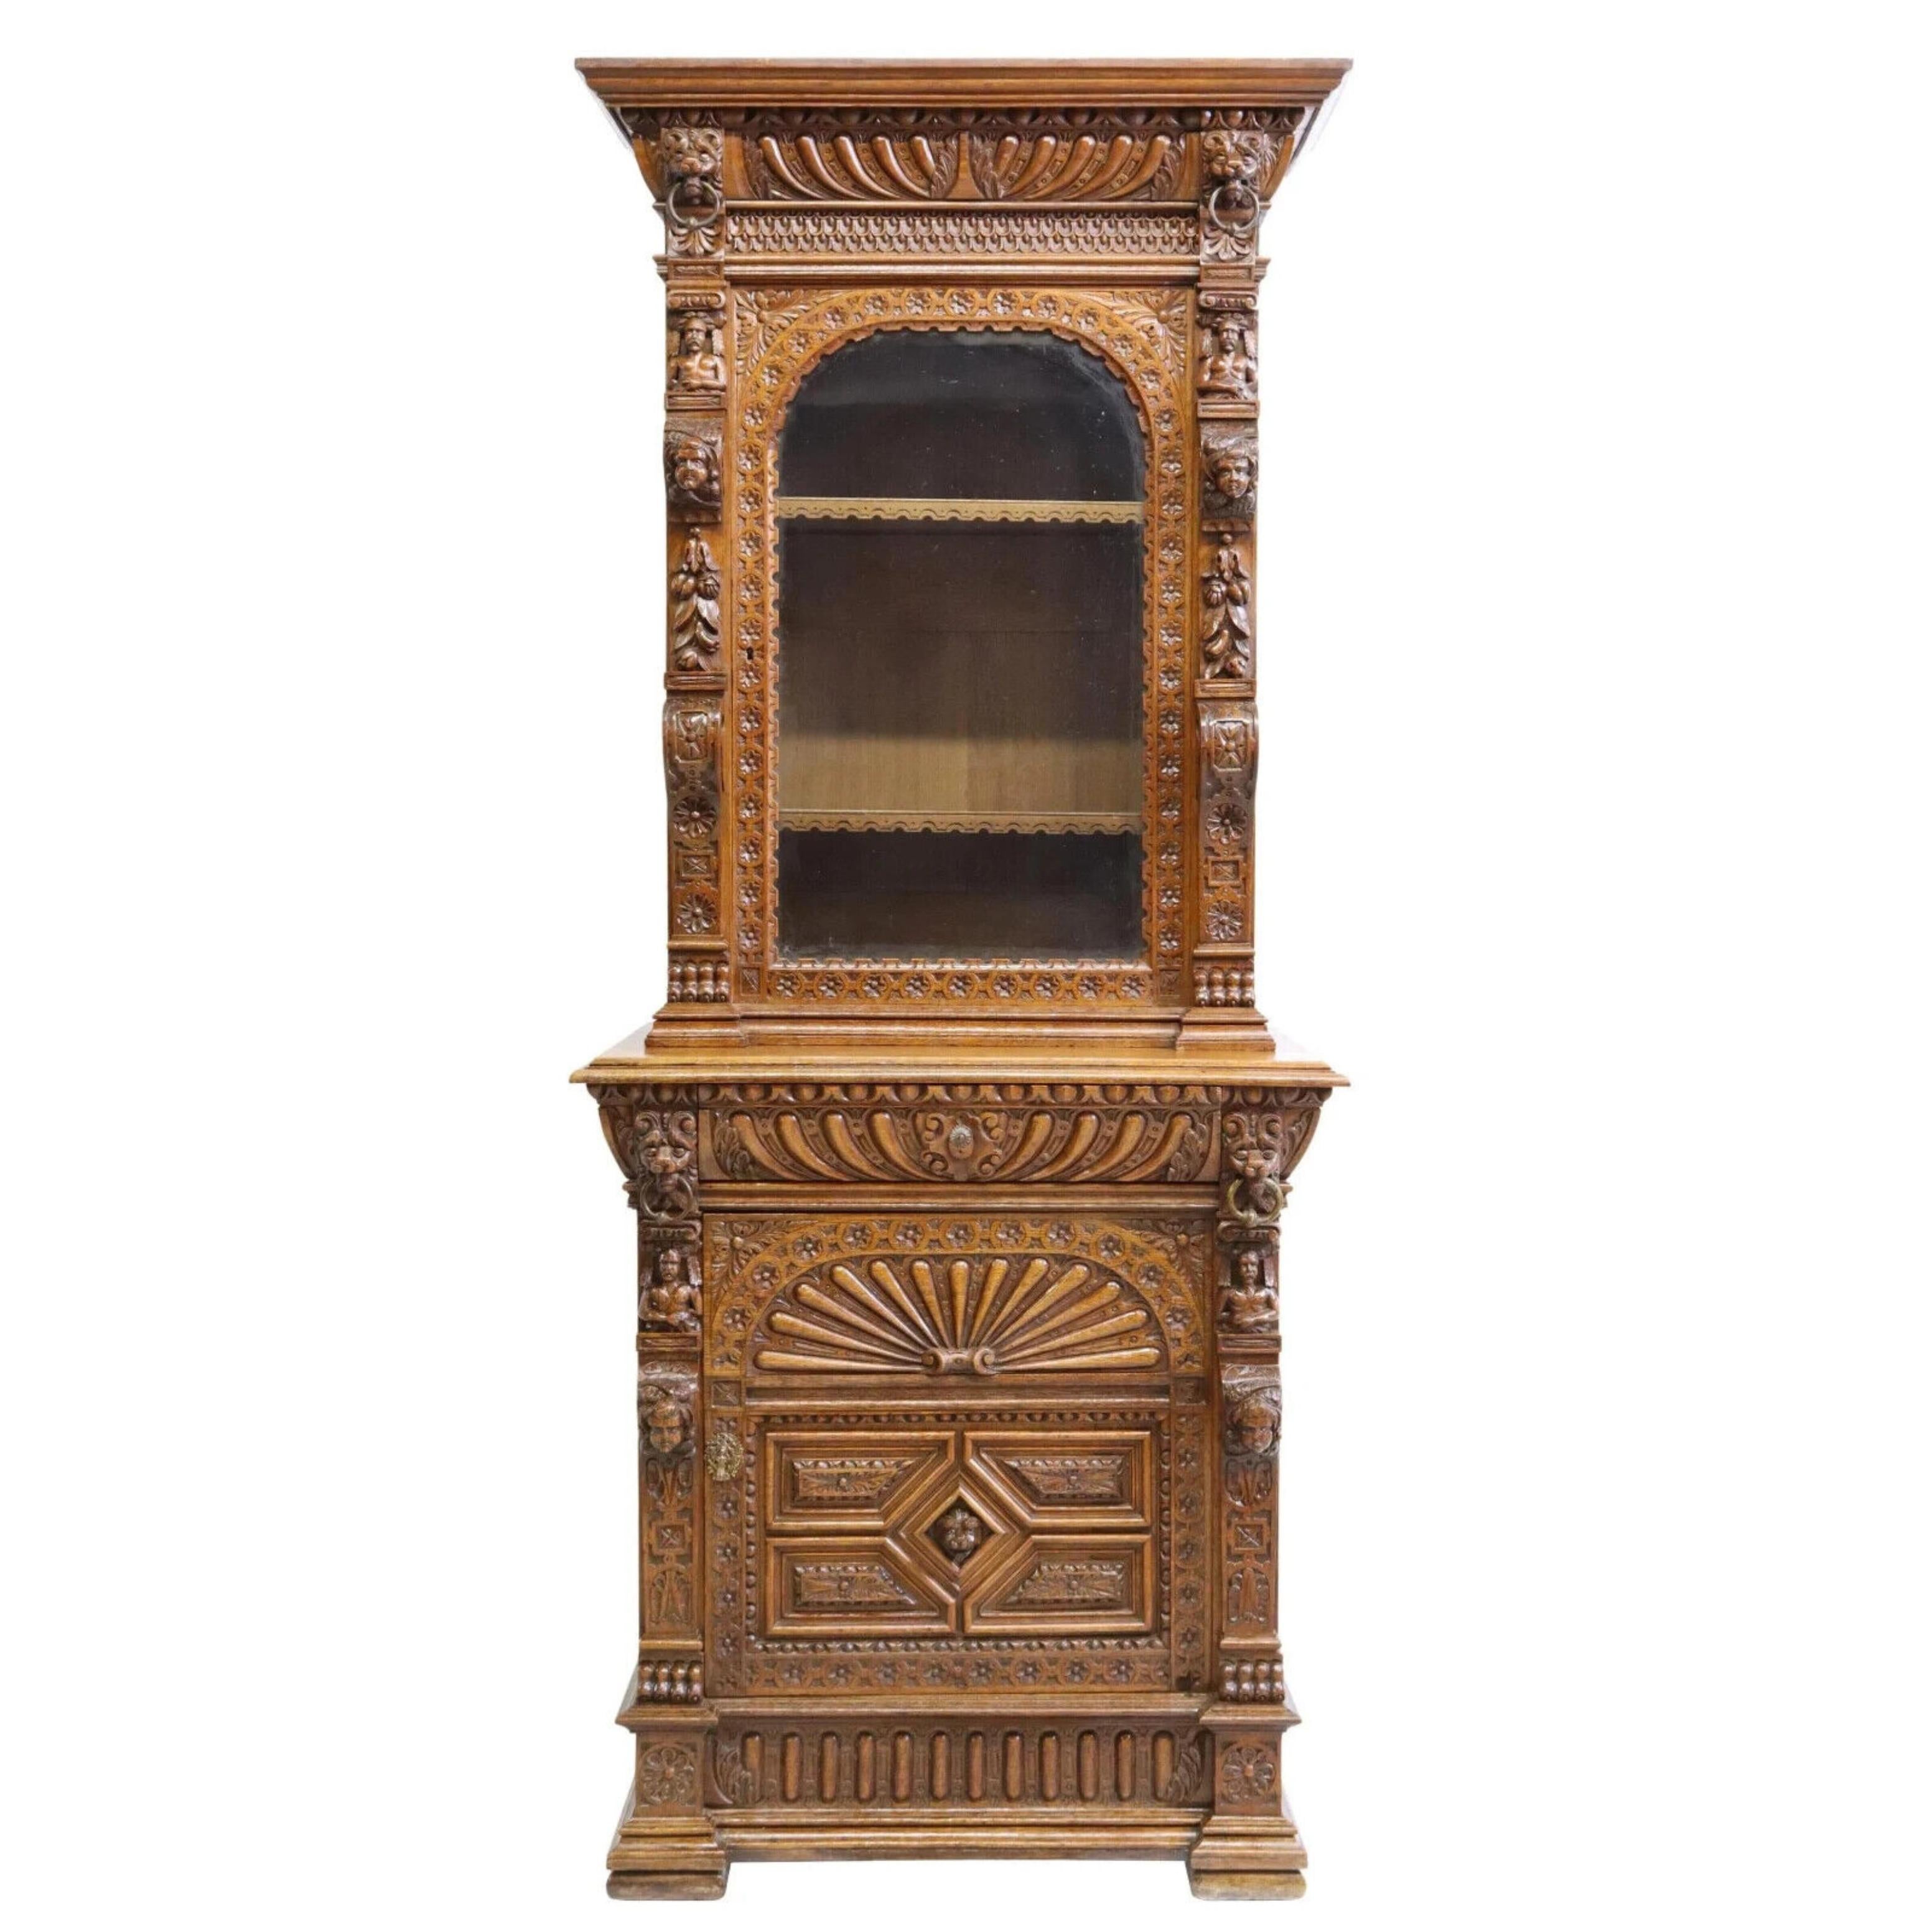 Beautiful Cabinet, French Renaissance Revival, Carved Oak, Glazed Door, Lion Mask,  19th Century, 1800s! Beautiful carvings and color!

French Renaissance Revival oak cabinet, late 19th c., molded cornice, carved lion mask with captured ring, glazed